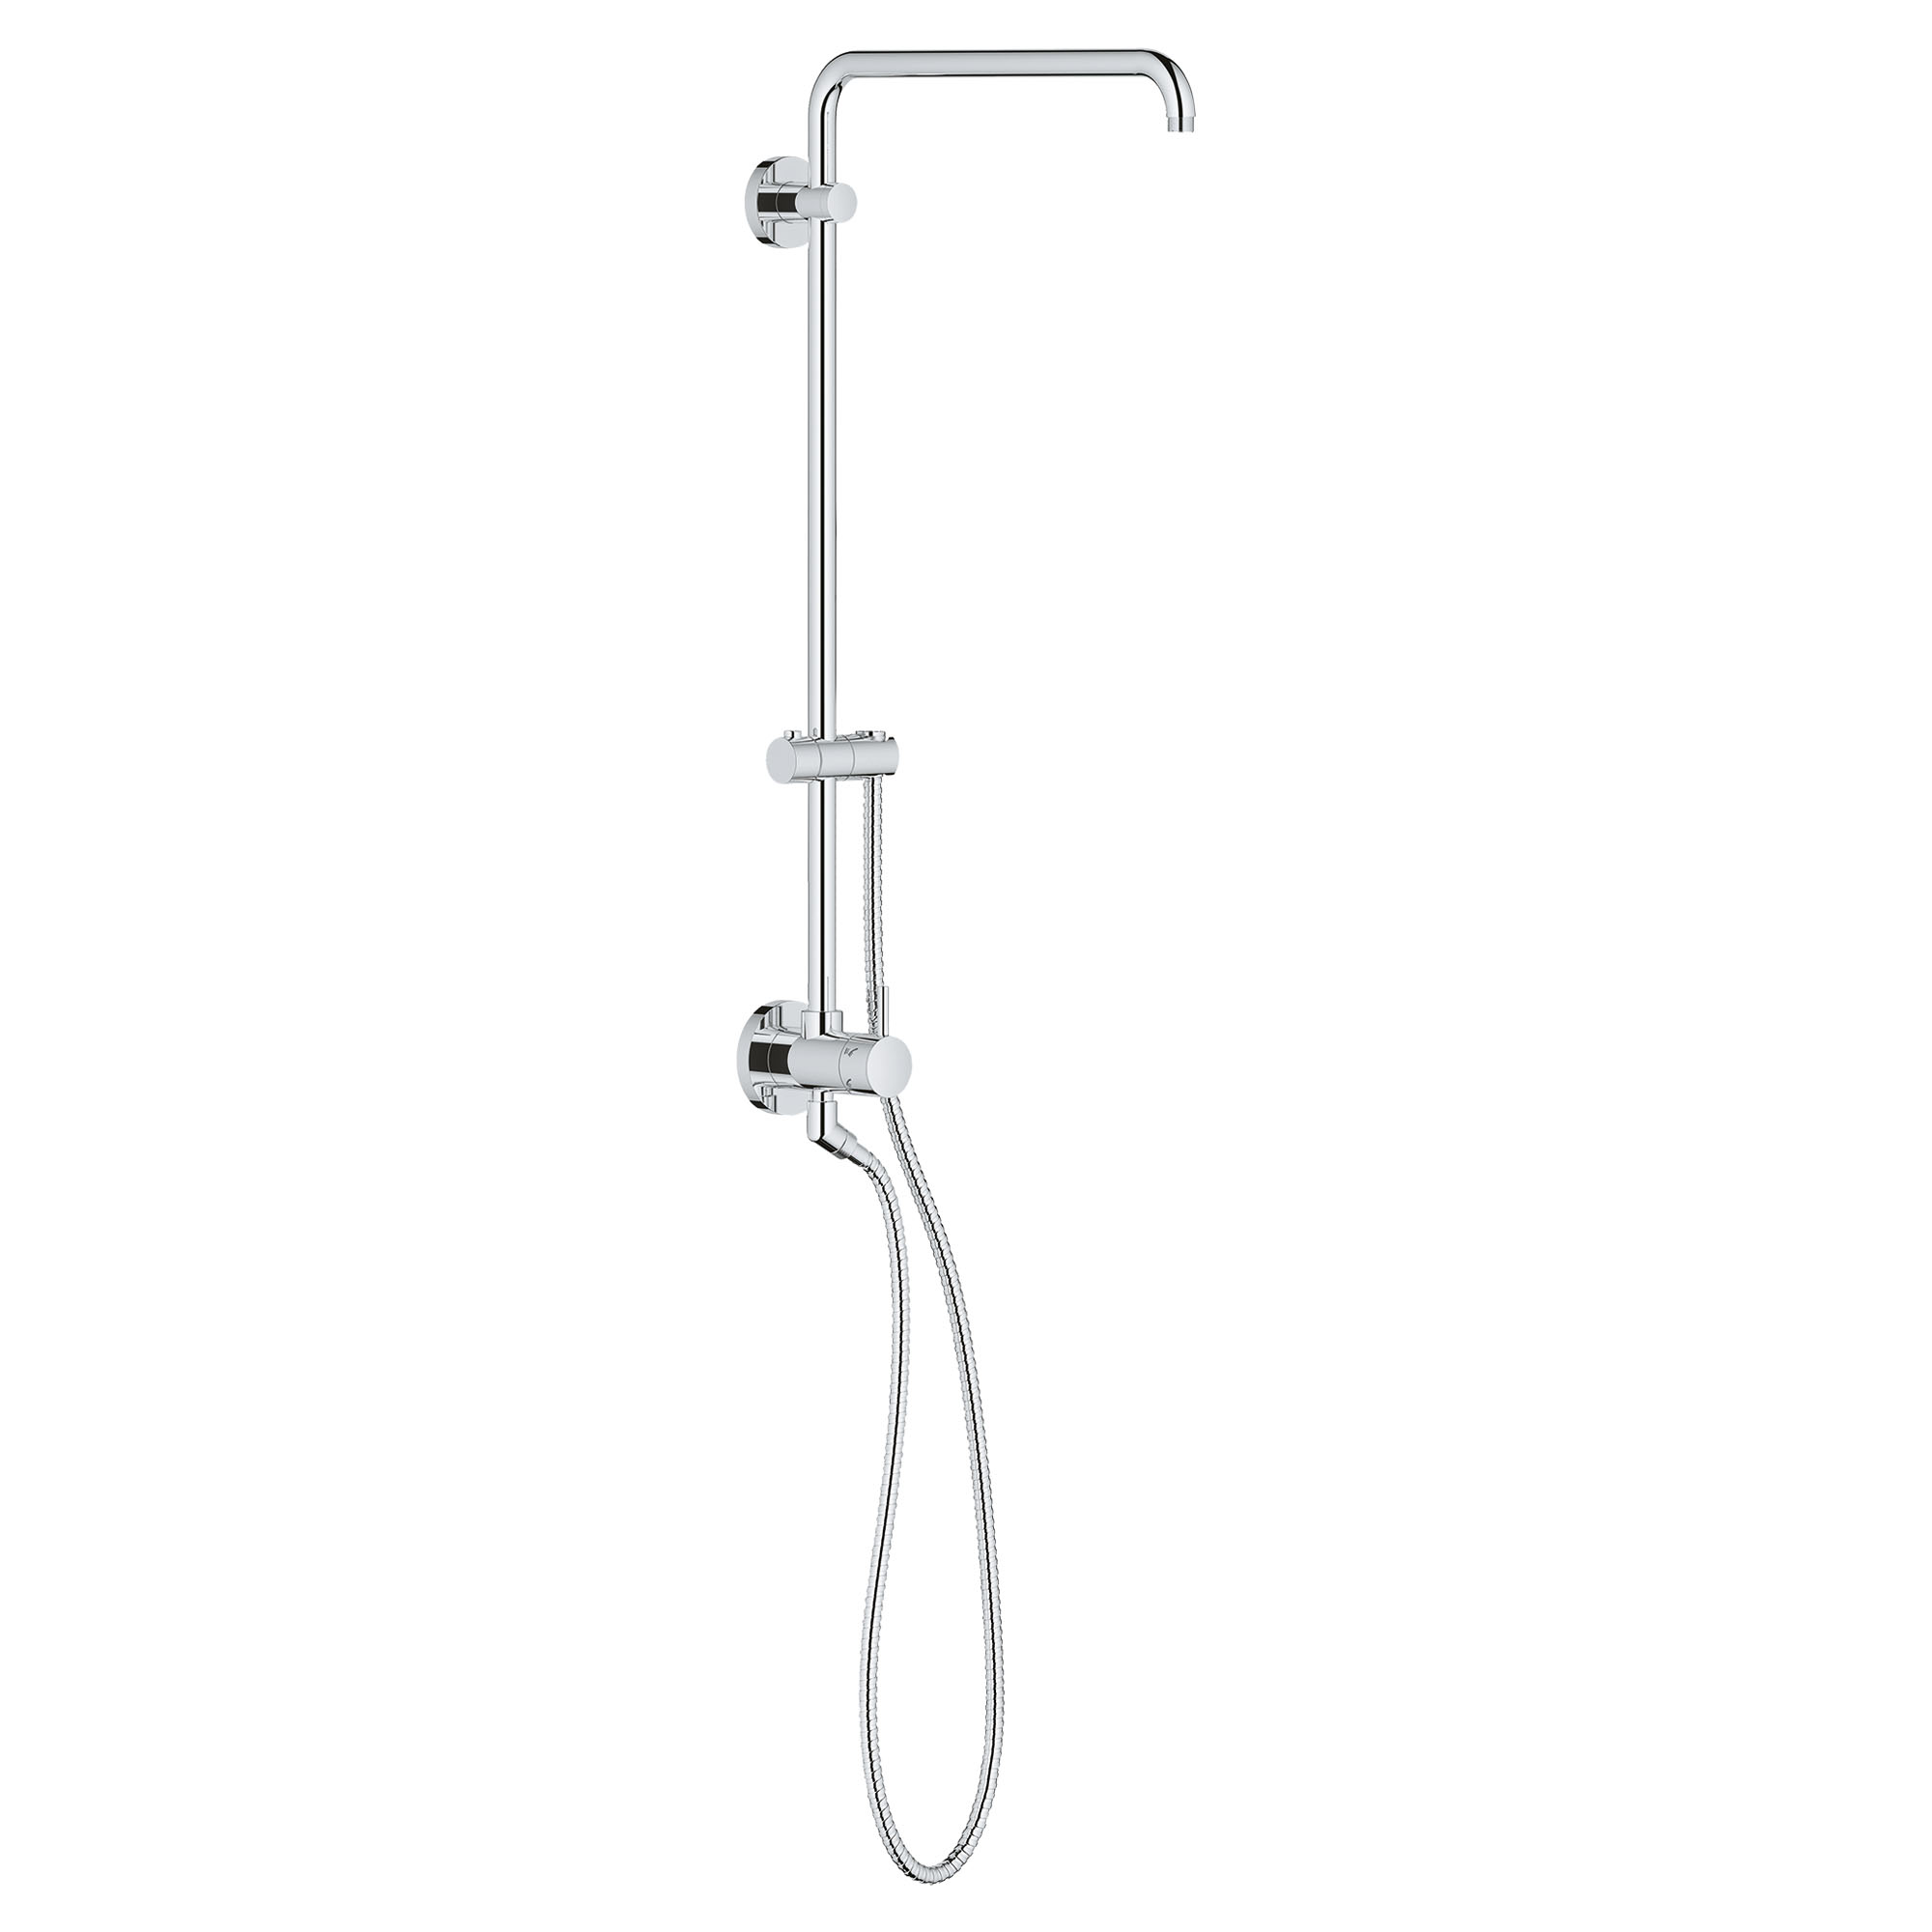 25" Shower System with Rainshower Shower Arm